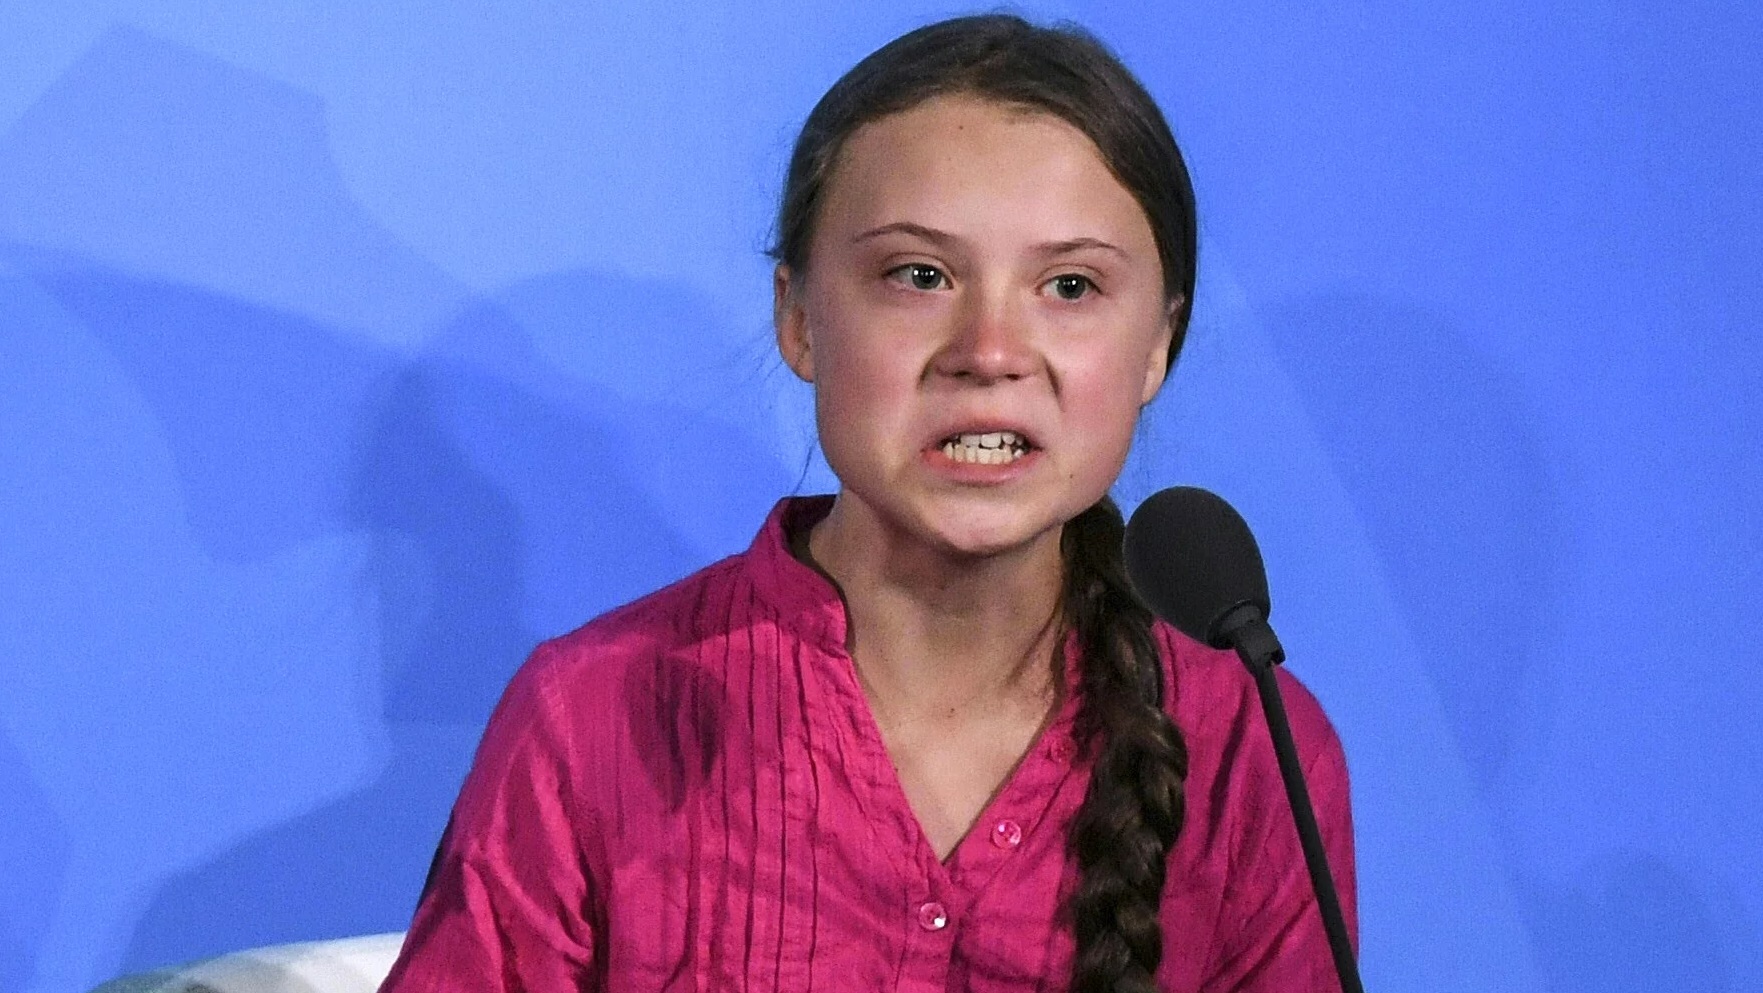 Image: More climate lies: Greta Thunberg’s yacht uses more fuel than a commercial airplane to travel similar distances